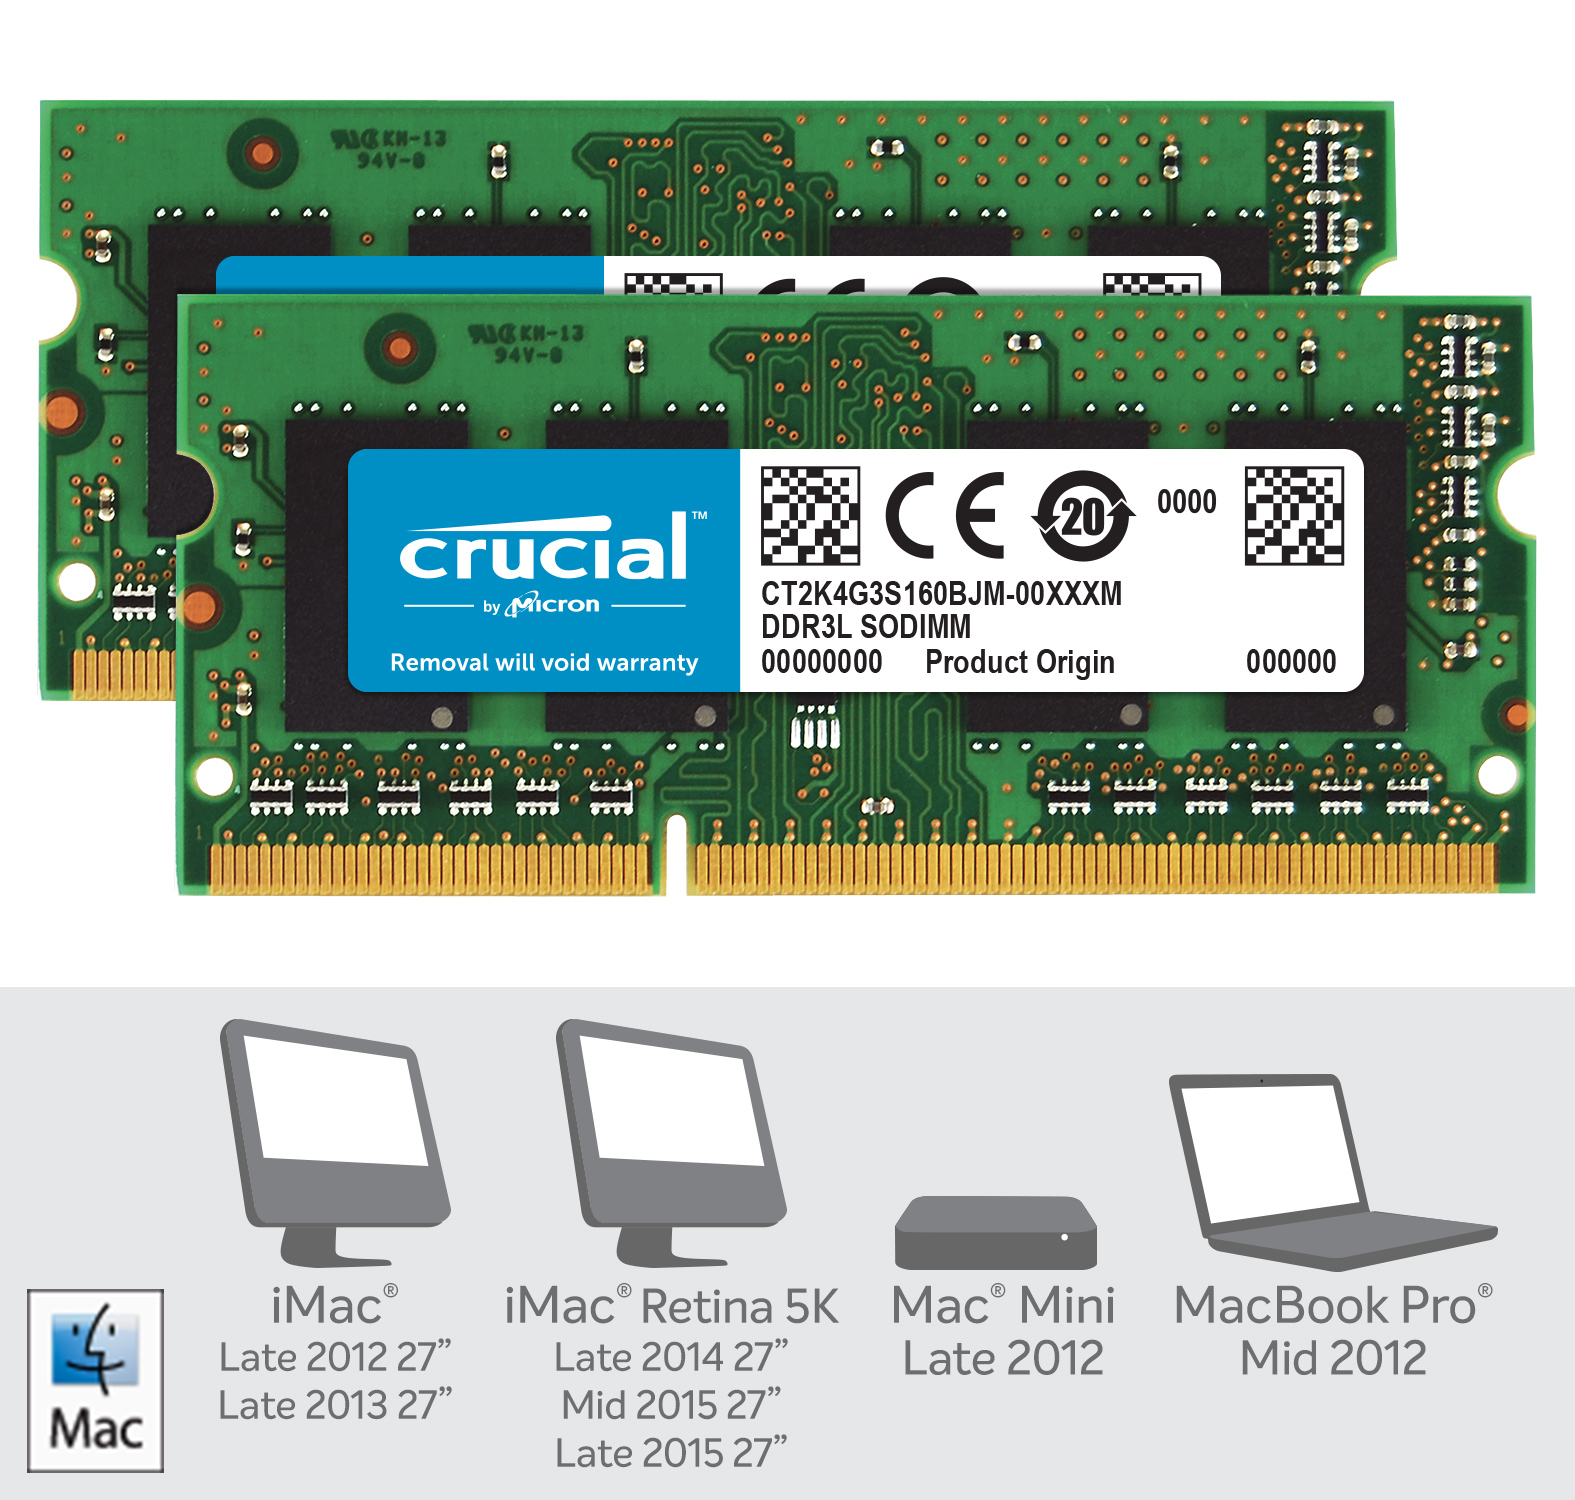 https://www.crucial.com/content/dam/crucial/dram-products/mac/images/compatibility/CT2K4G3S160BJM-crucial-memory-for-mac-compatibility-image.jpg